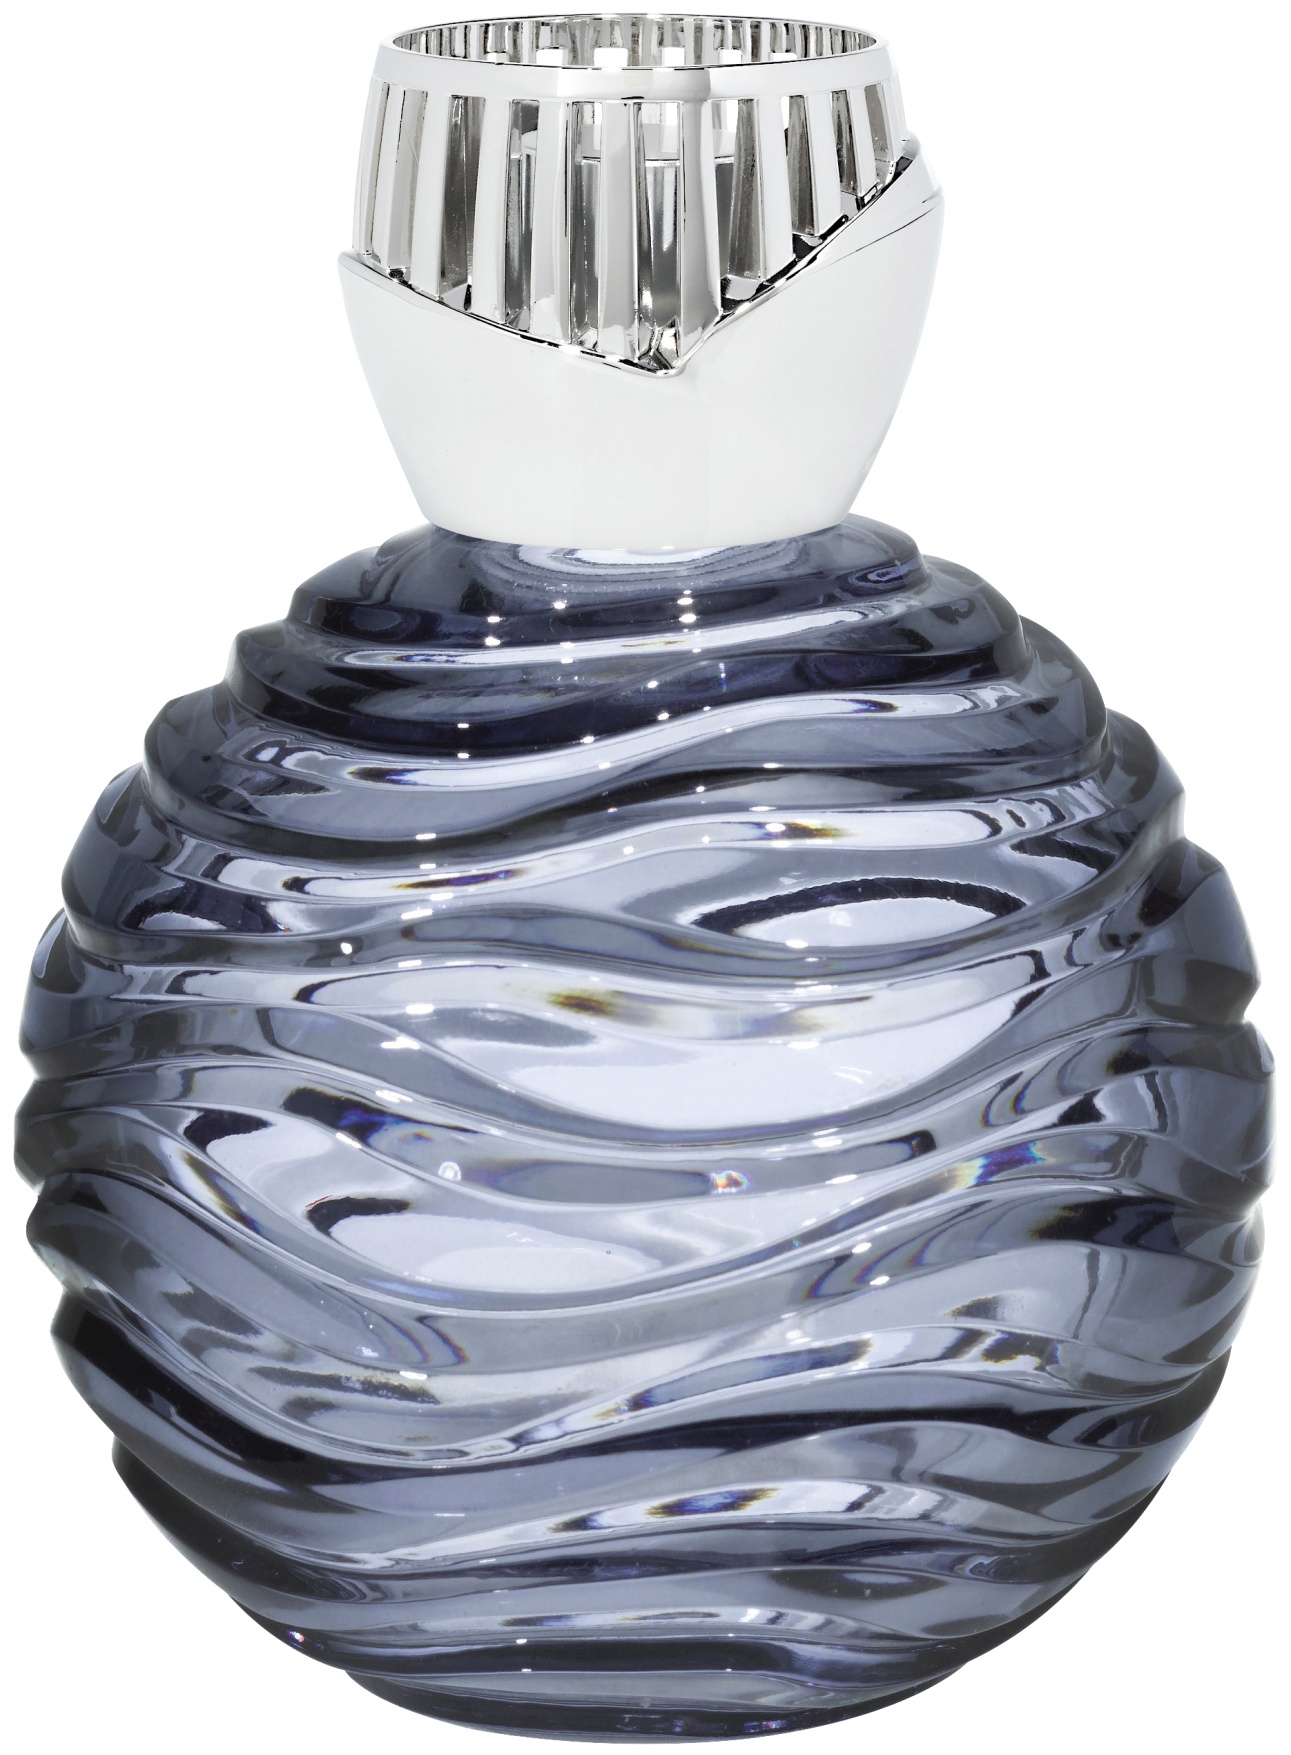 Lampa catalitica Berger Les Editions d’art Crystal Globe Smocked Maison Berger